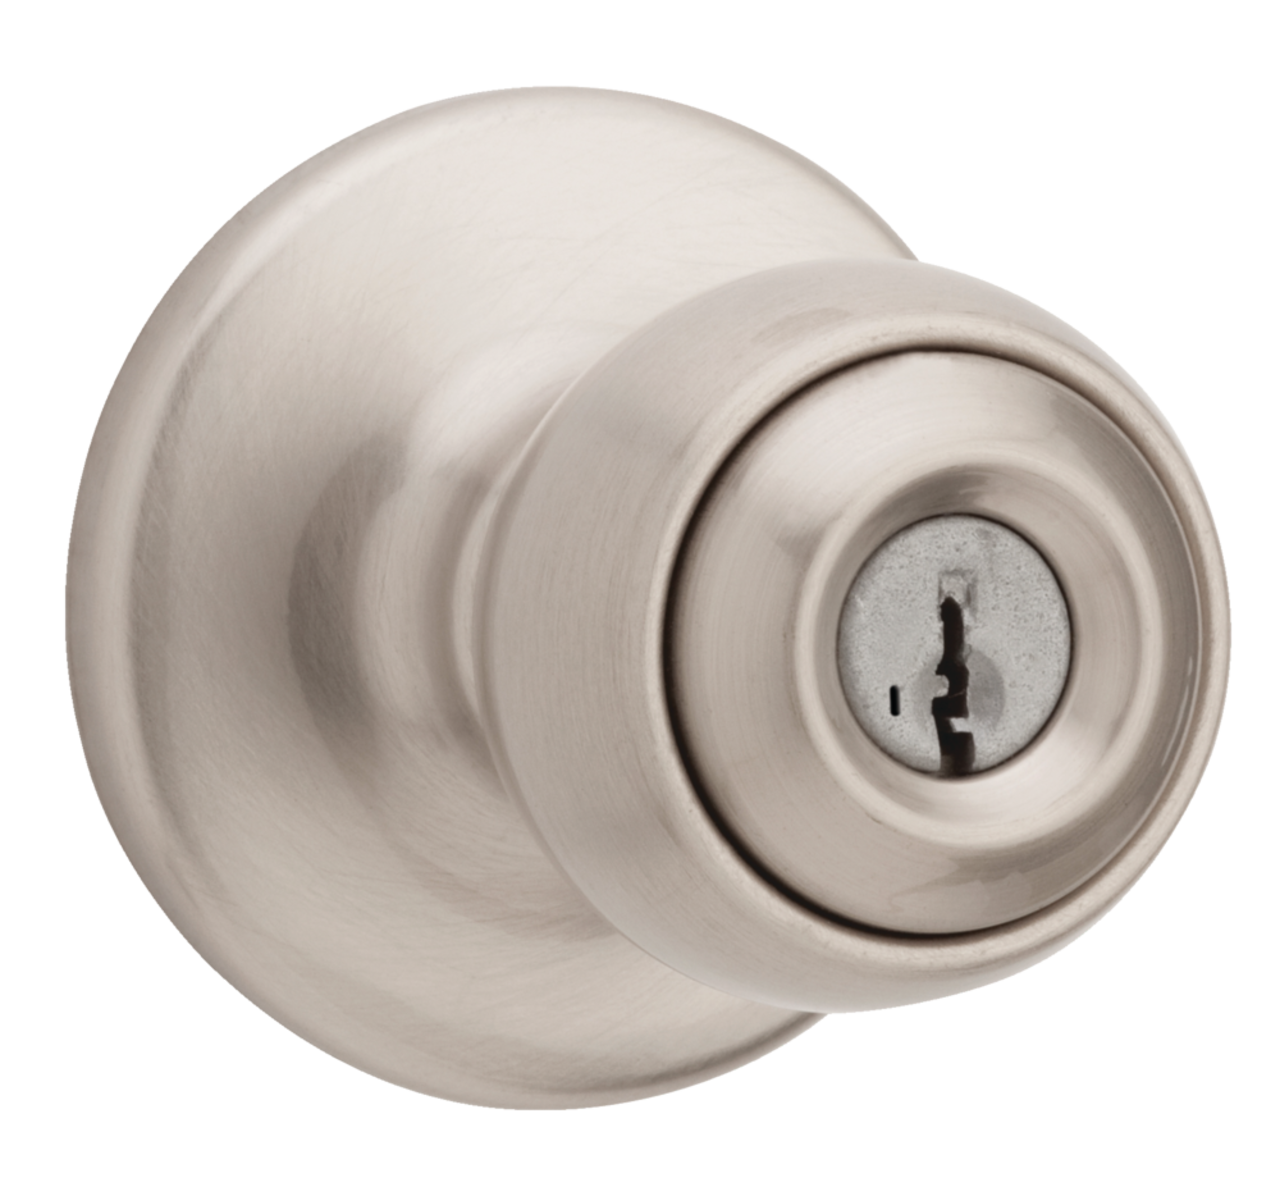 https://media-www.canadiantire.ca/product/fixing/hardware/curb-appeal/0462854/weiser-keyed-entry-ball-handle-lockset-satin-nickel-3bb77db0-5499-4981-b6af-df0406afbcf3.png?imdensity=1&imwidth=640&impolicy=mZoom